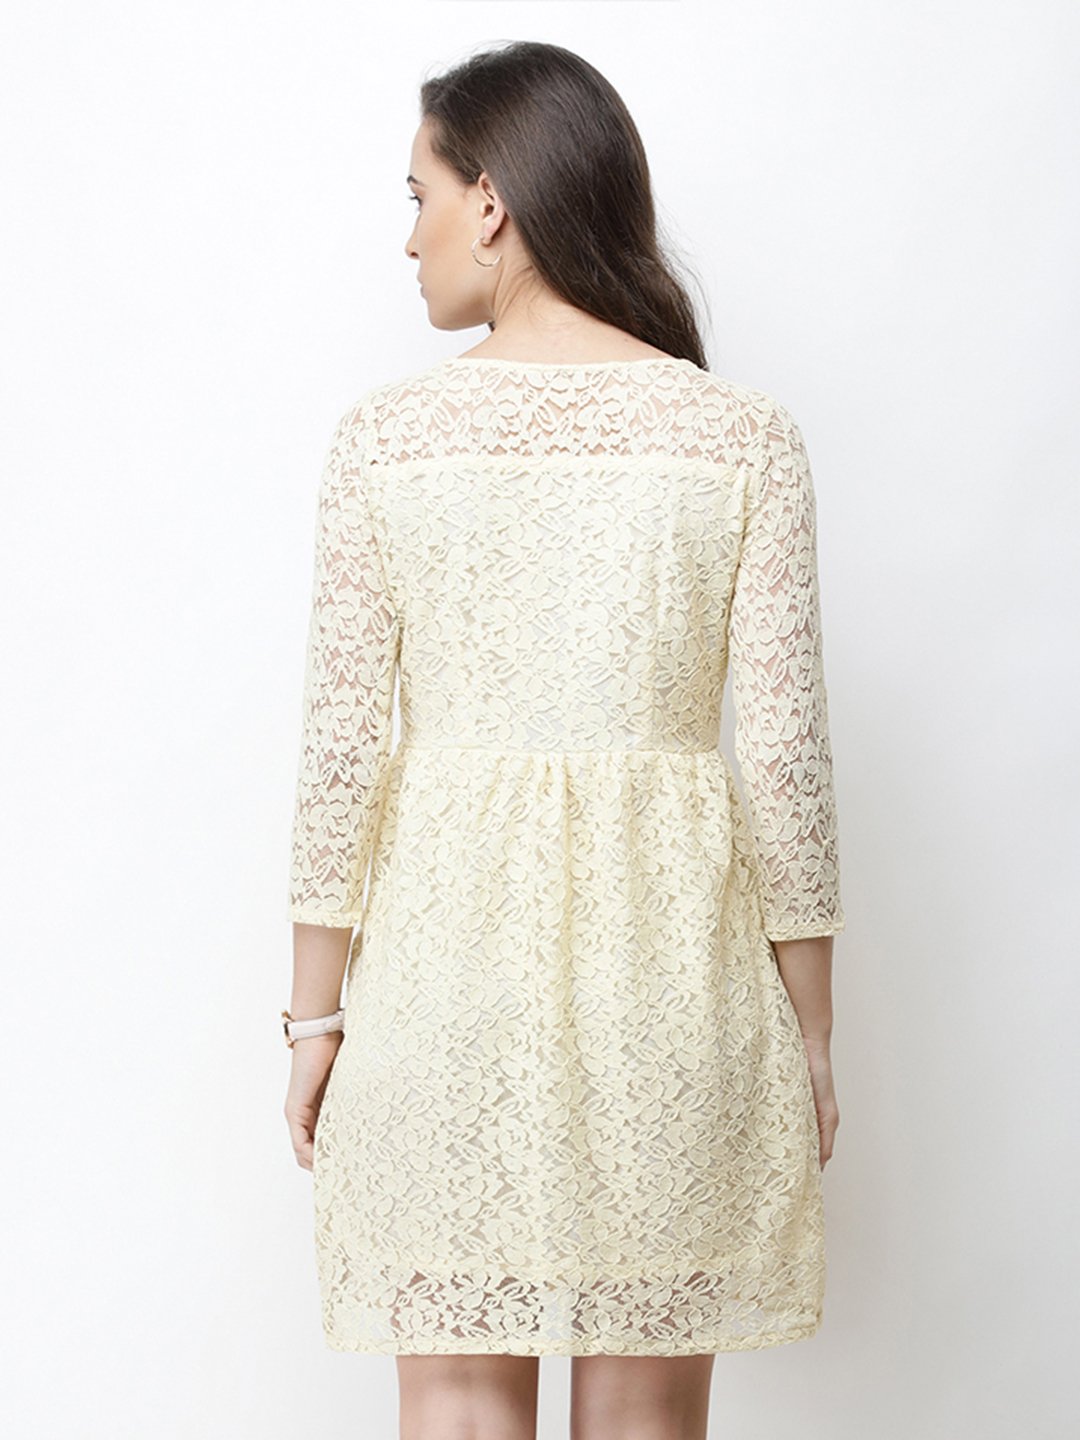 Cation Cream Lace Dress